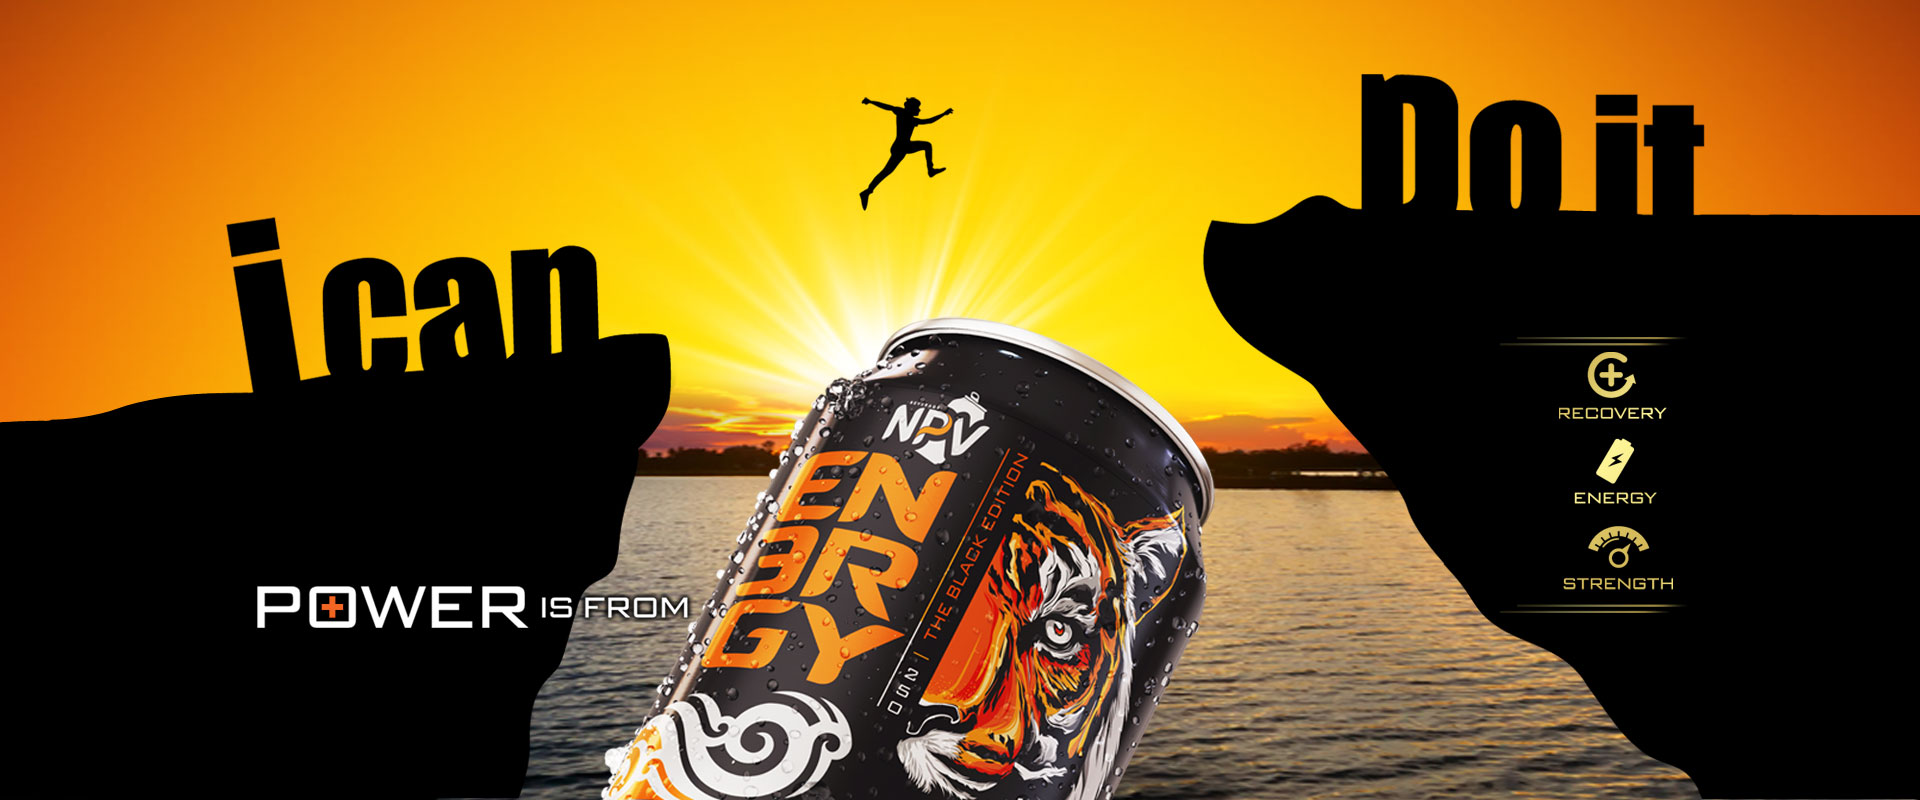 Healthy Energy Drinks -Brighten up your day - NPV Beverage